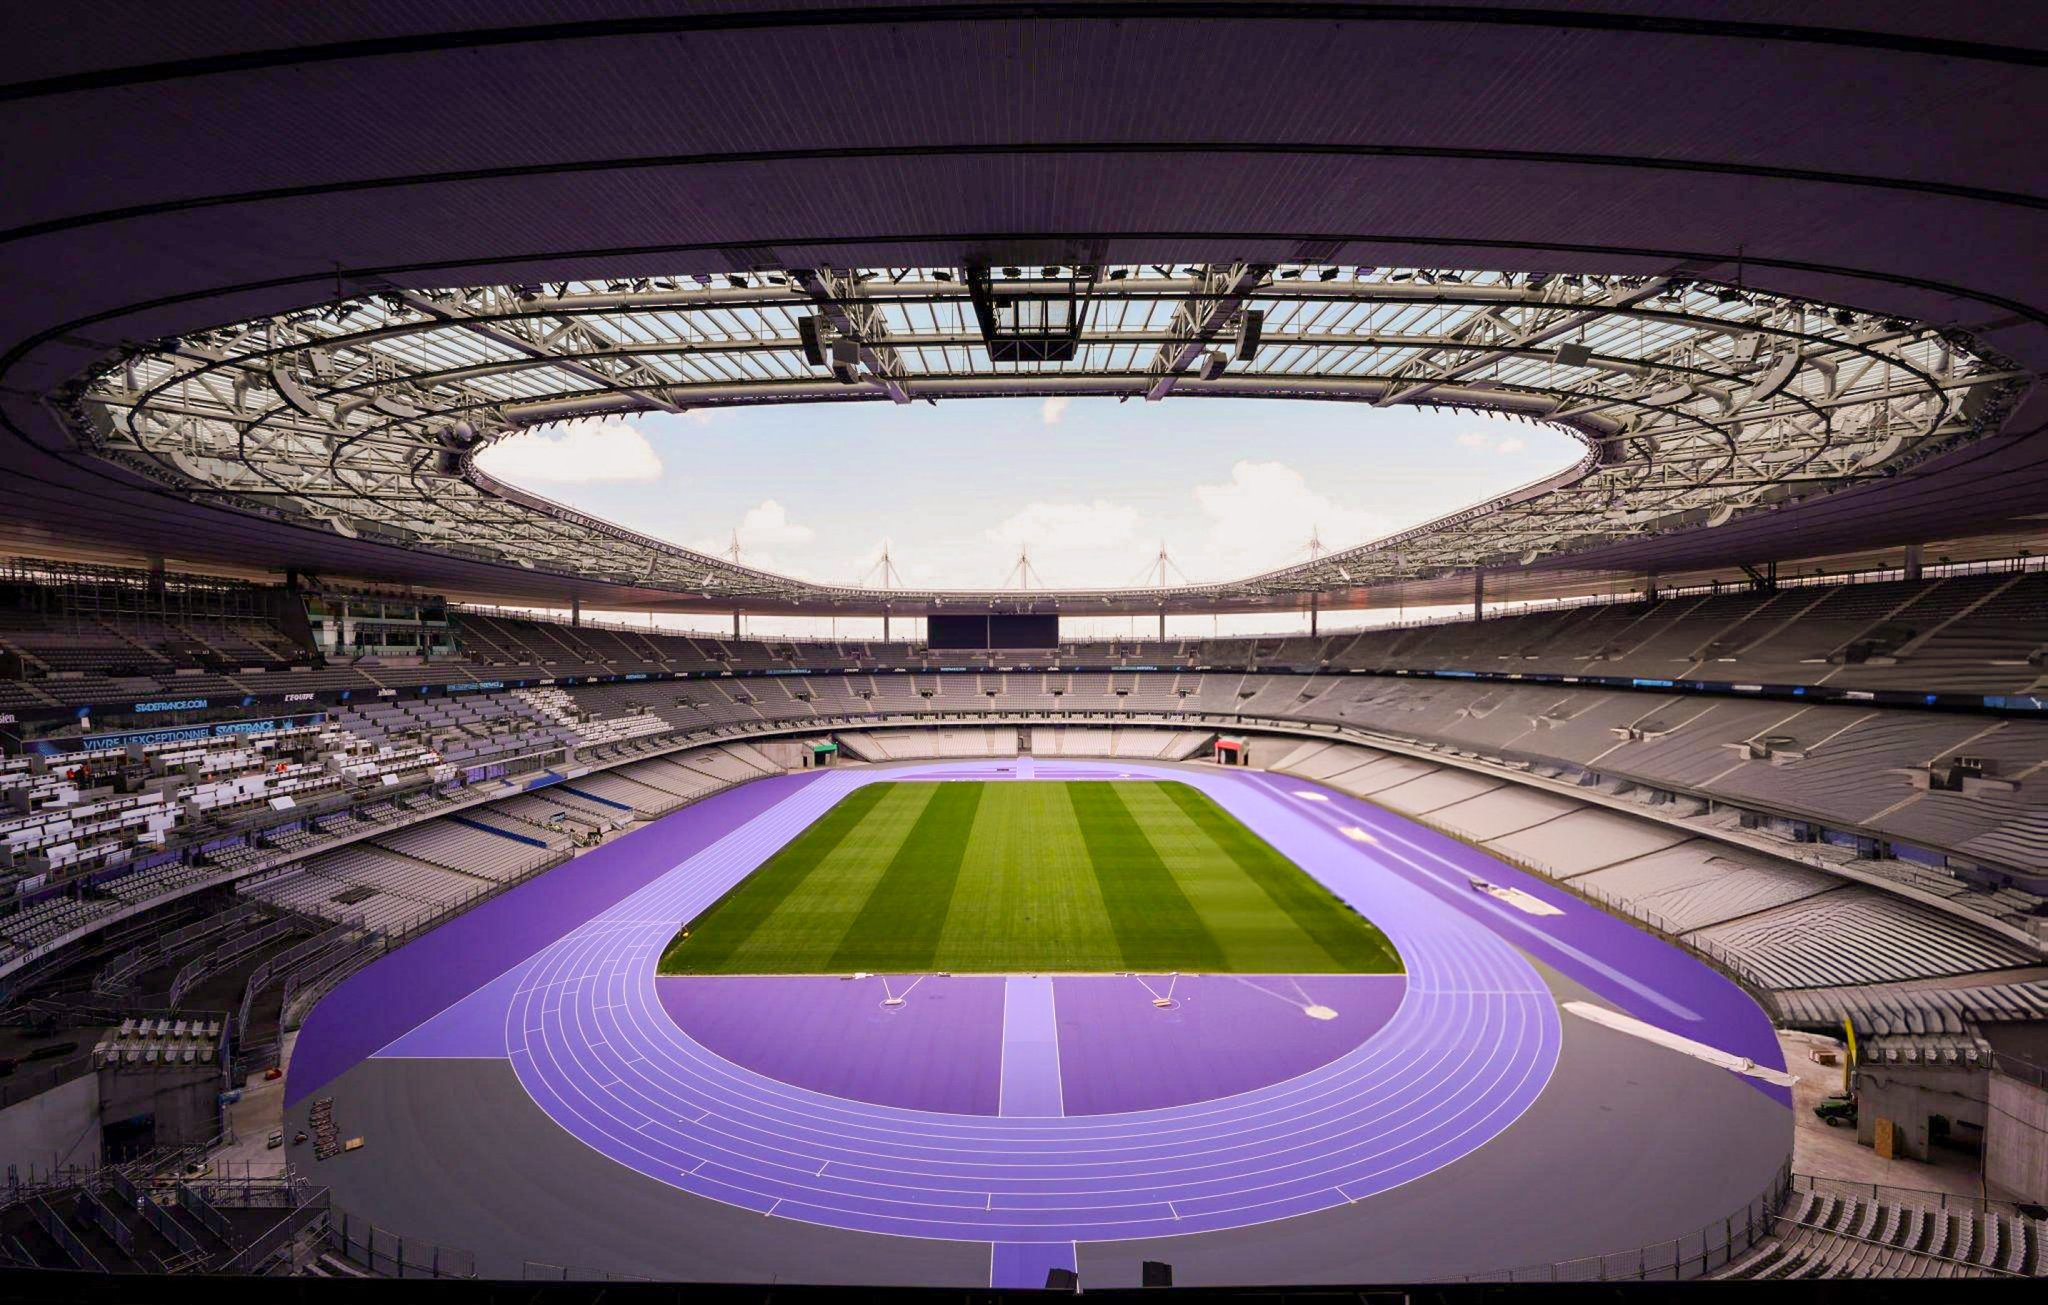 The Evolution of the Olympics: From Ancient Greece to Paris 2024